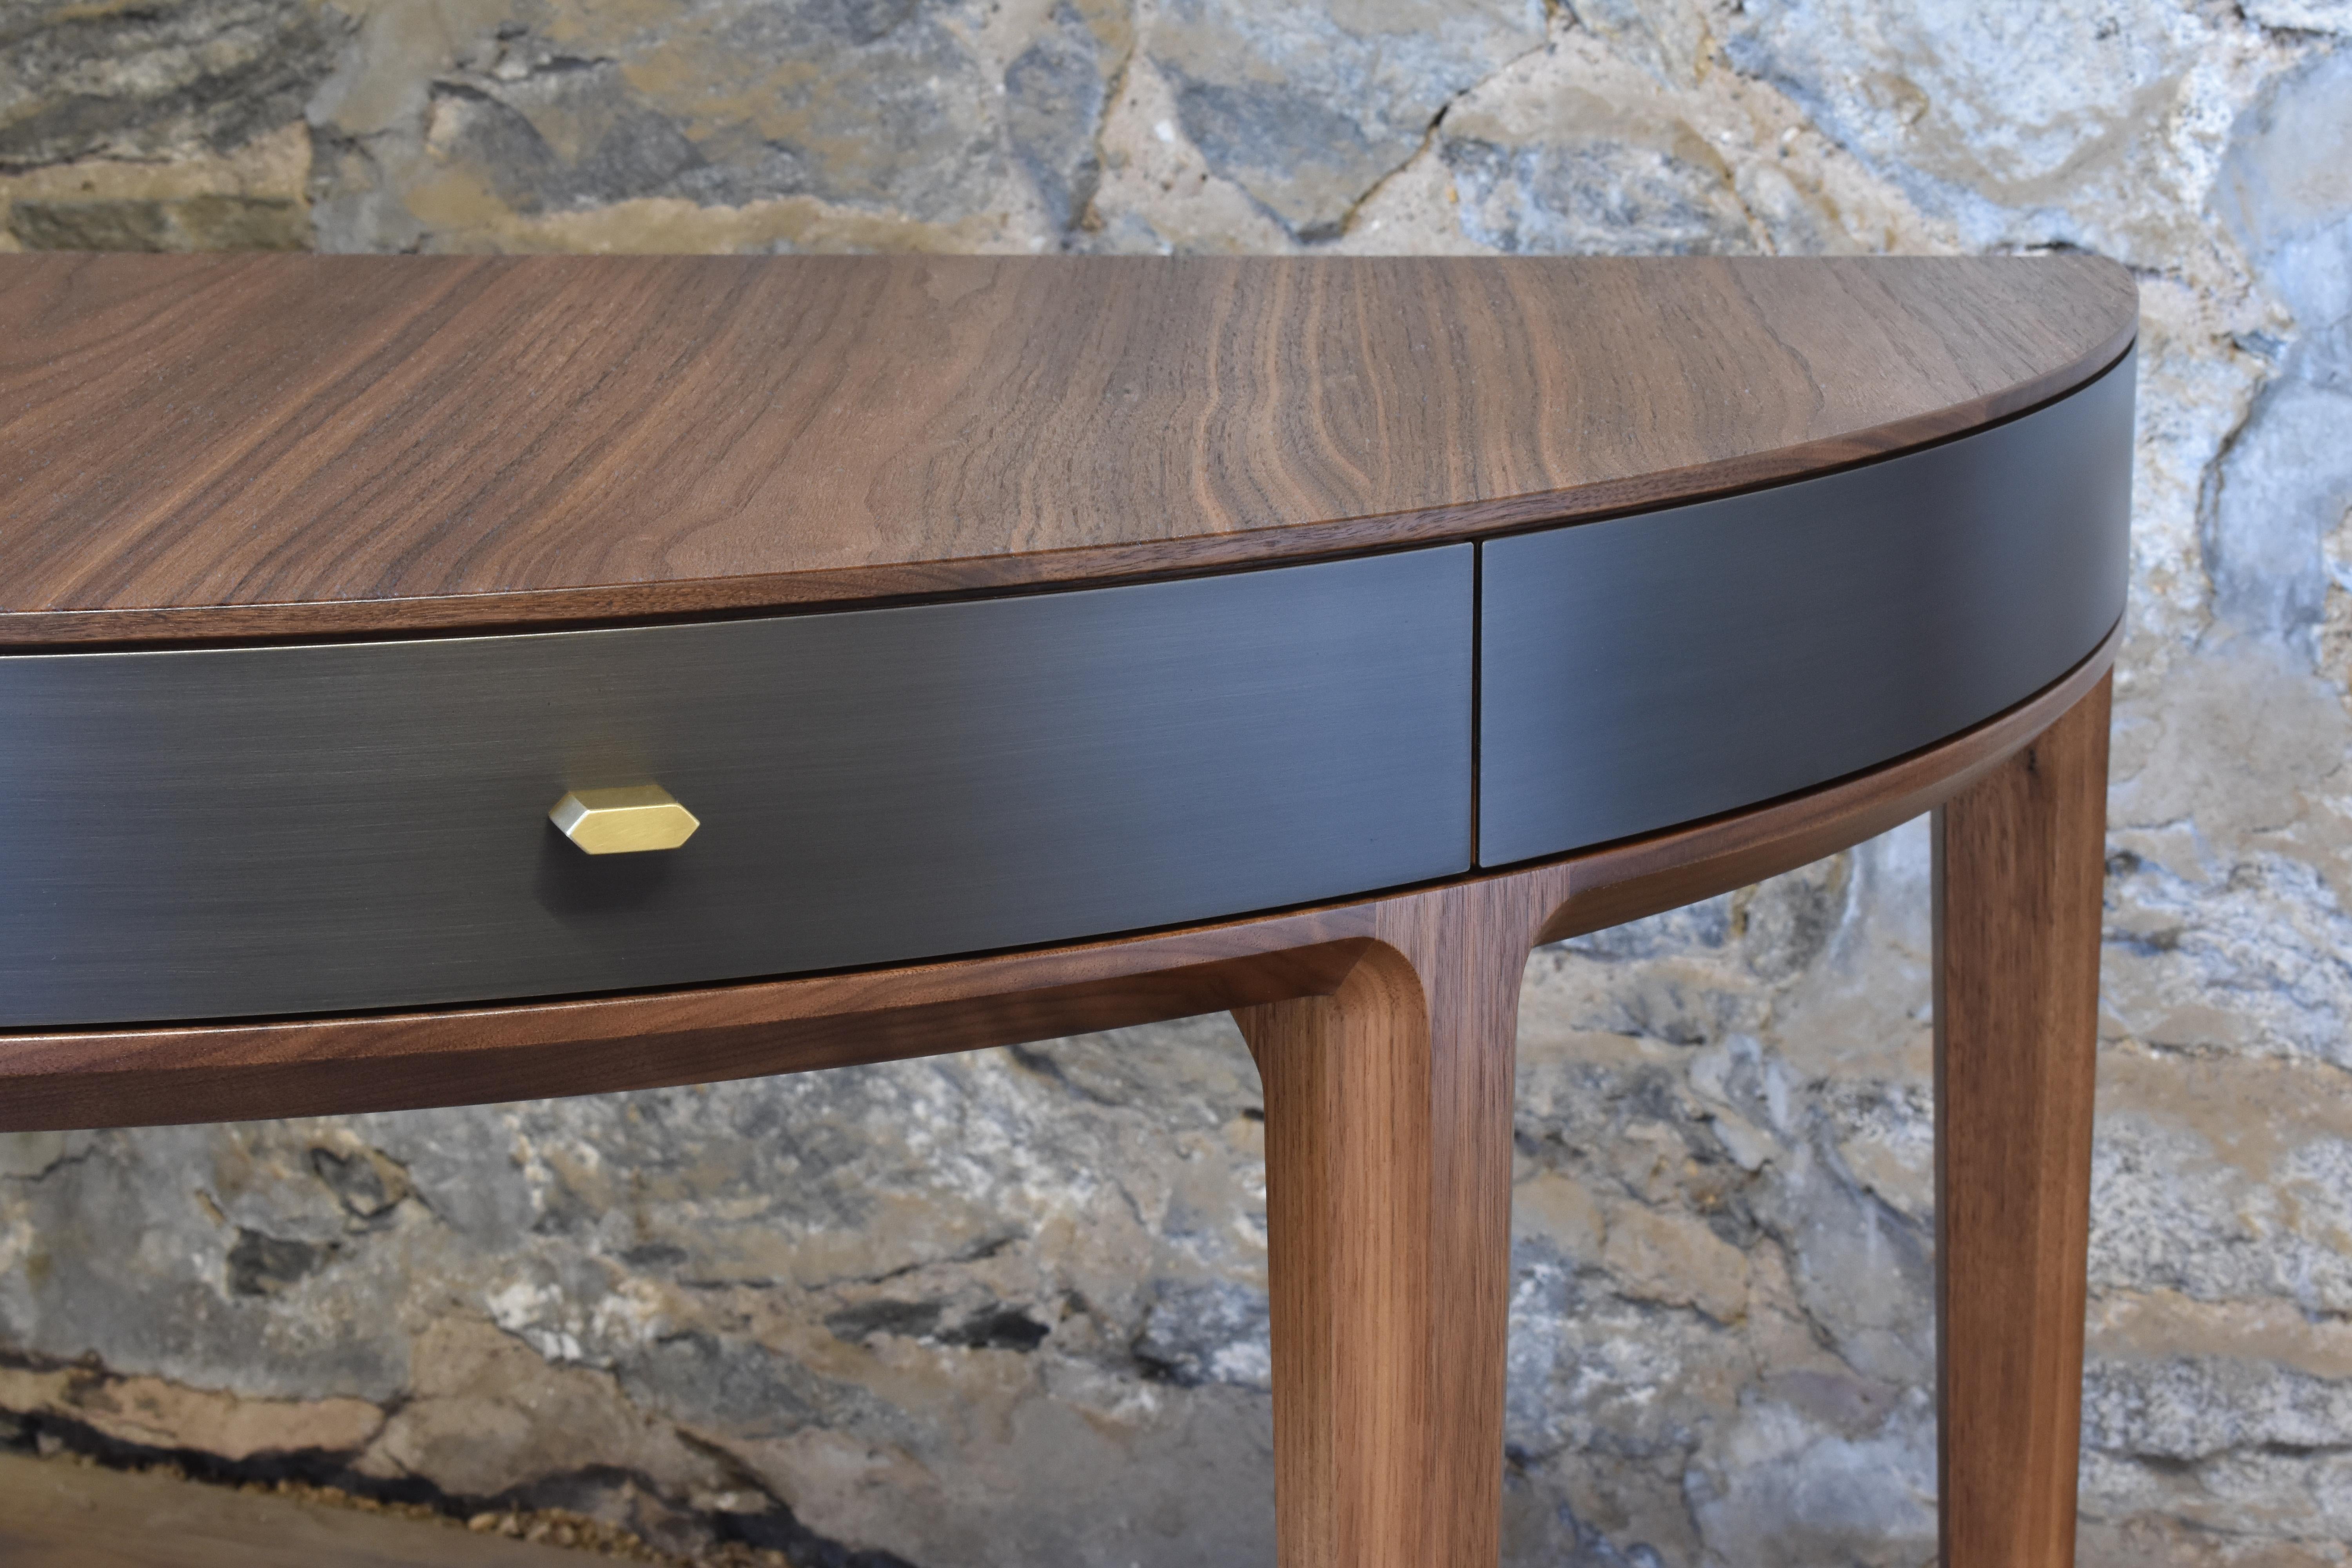 Shown in oiled walnut and gunmetal steel with burnished bronze hardware, the Tulare demilune desk features two solid wood drawers, custom made hardware and hand applied finishes.
Dimensions (as pictured): 48